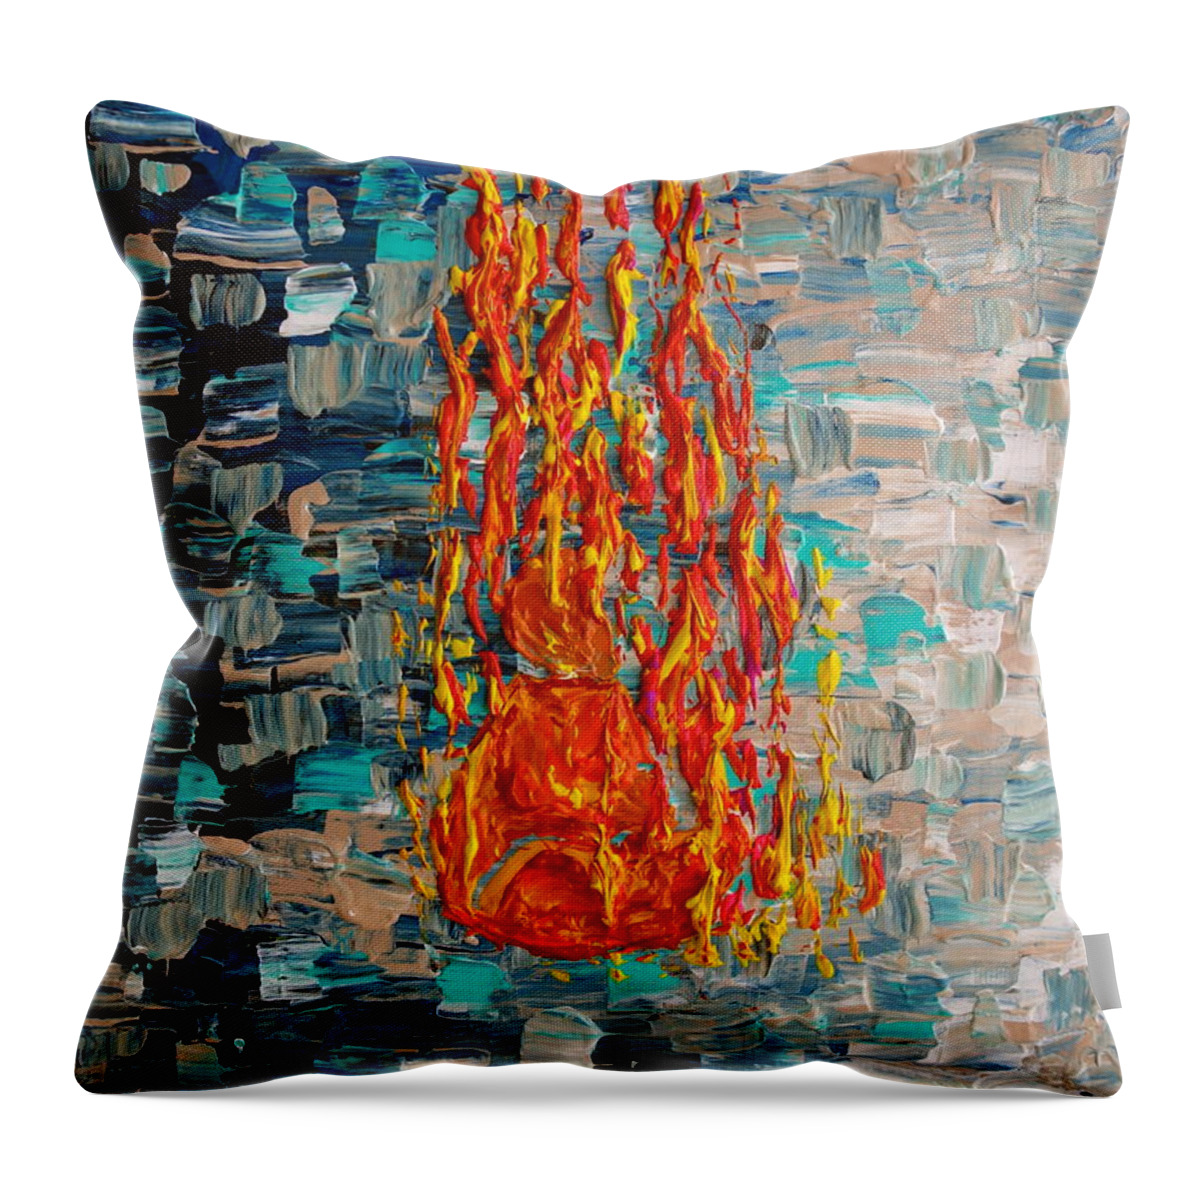 Self Immolated Throw Pillow featuring the painting Free Tibet by Jacqueline Athmann